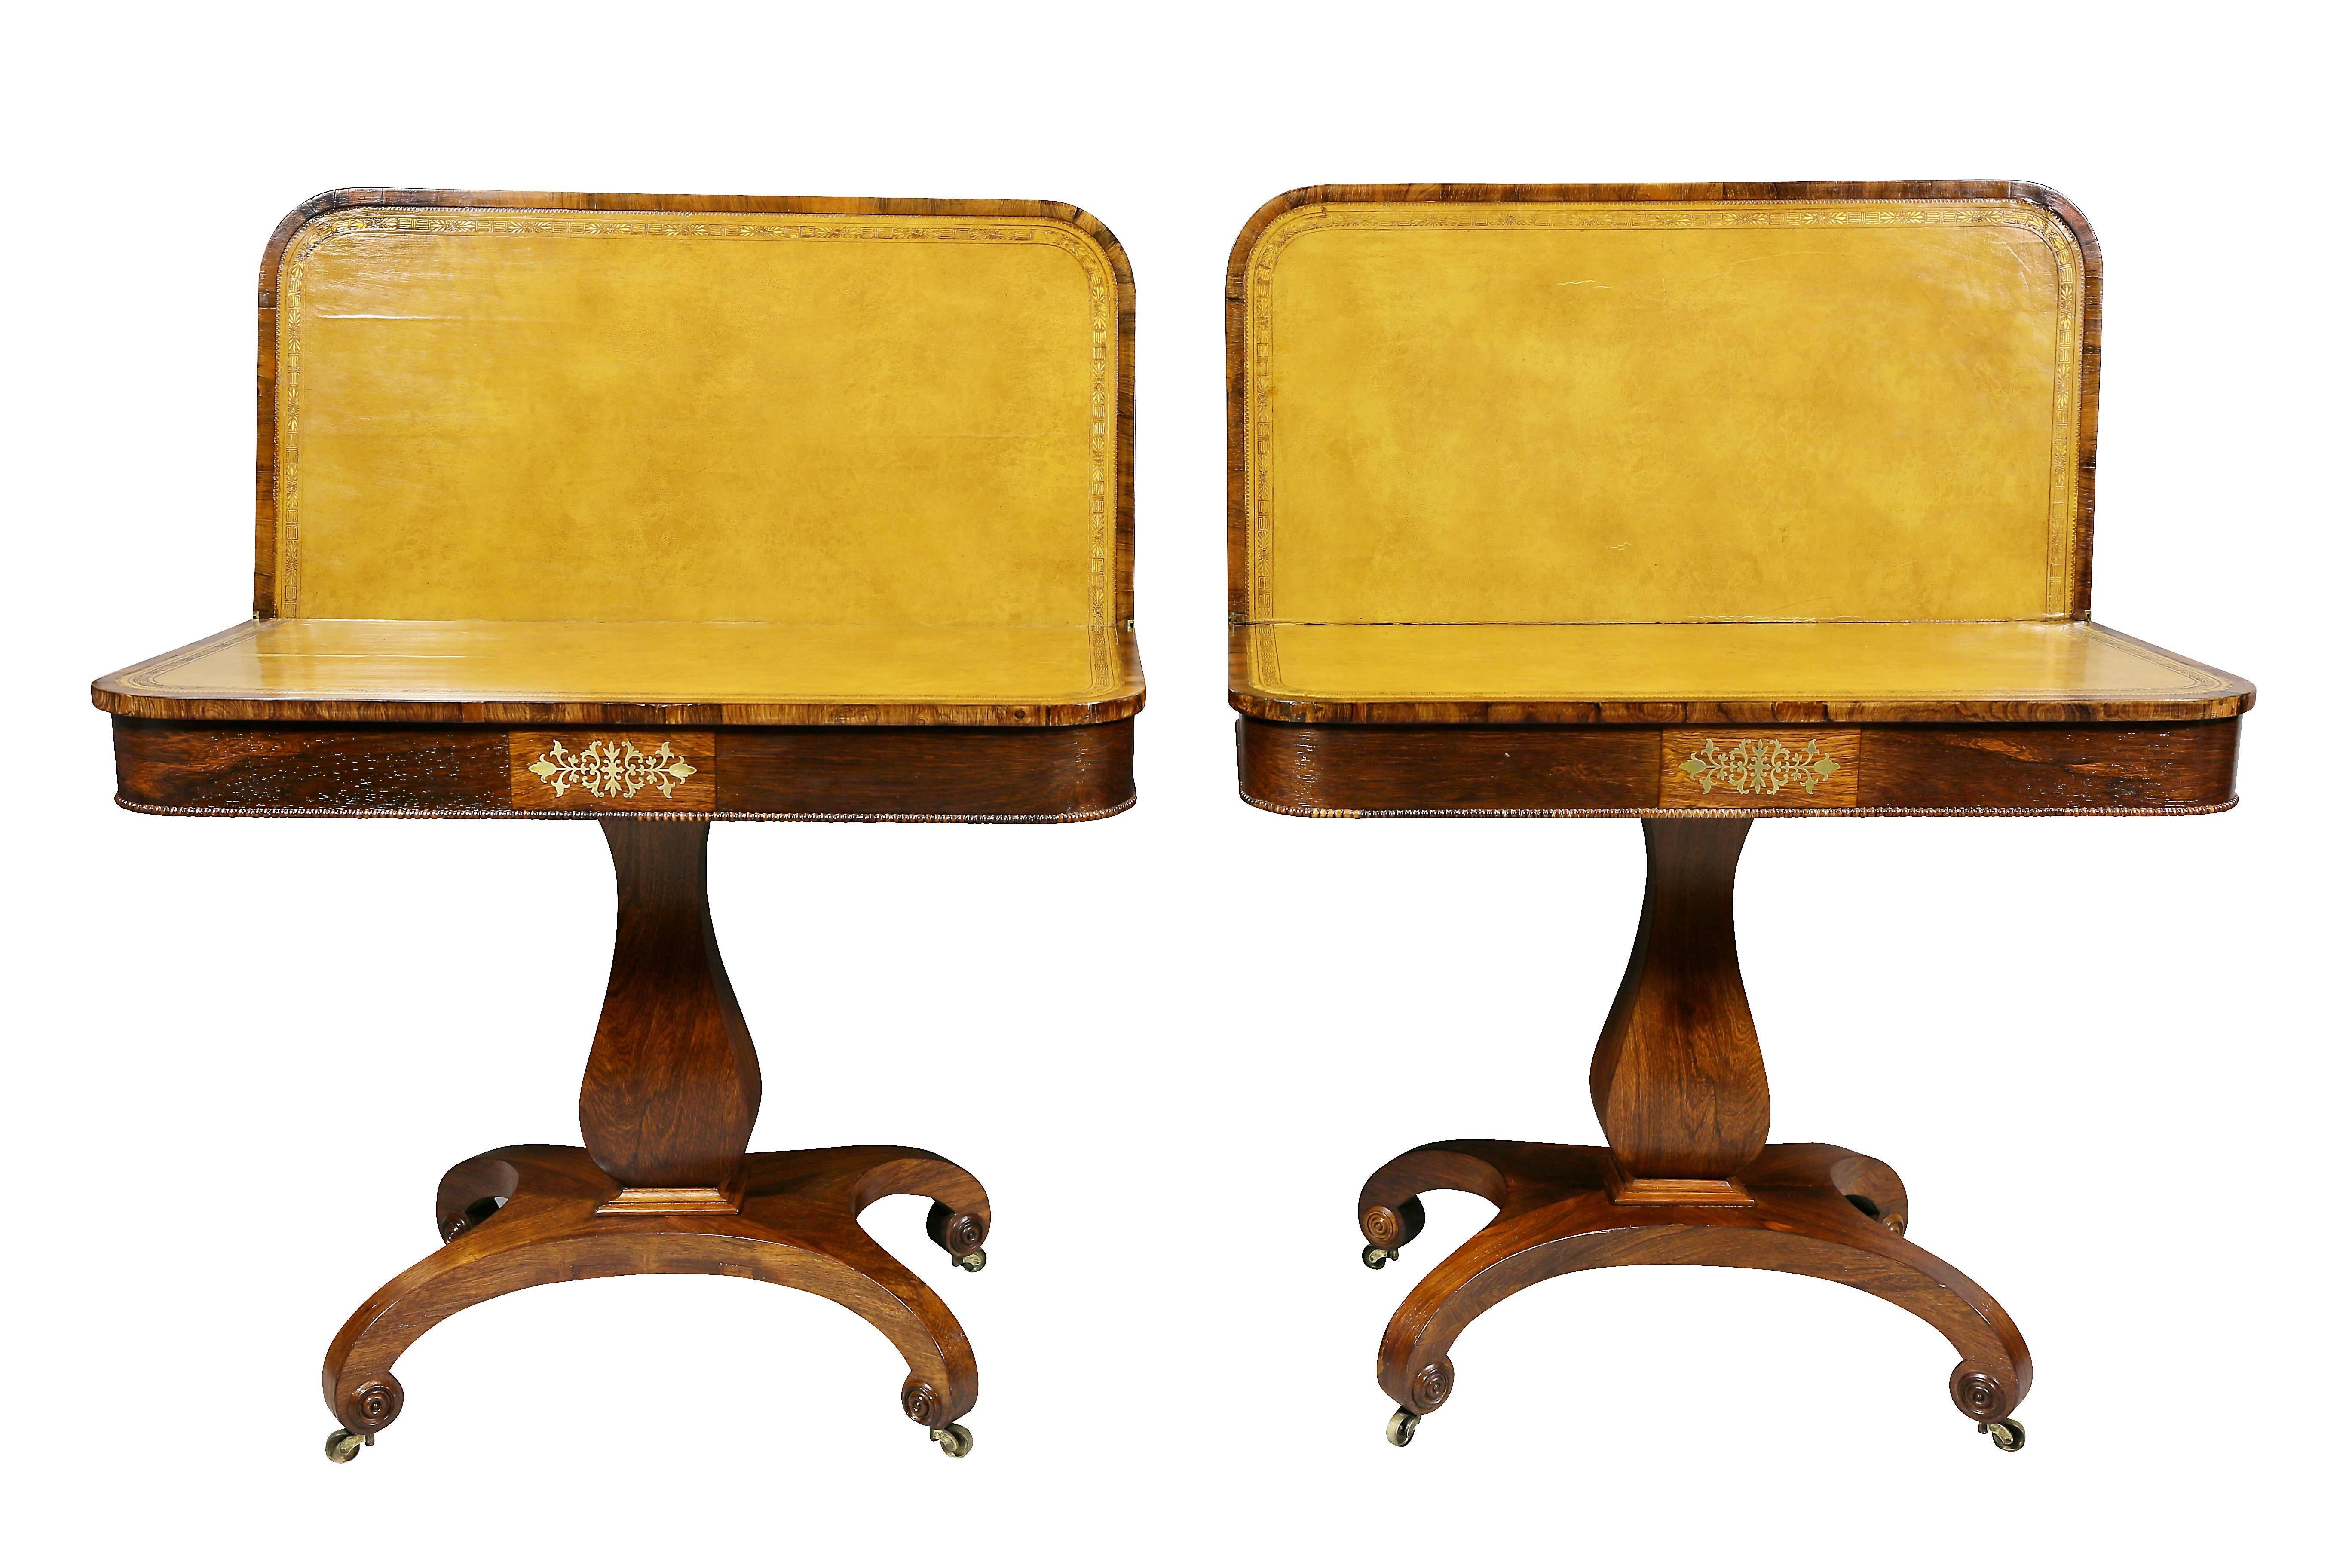 English Pair of Late Regency Rosewood and Brass Inlaid Games Tables